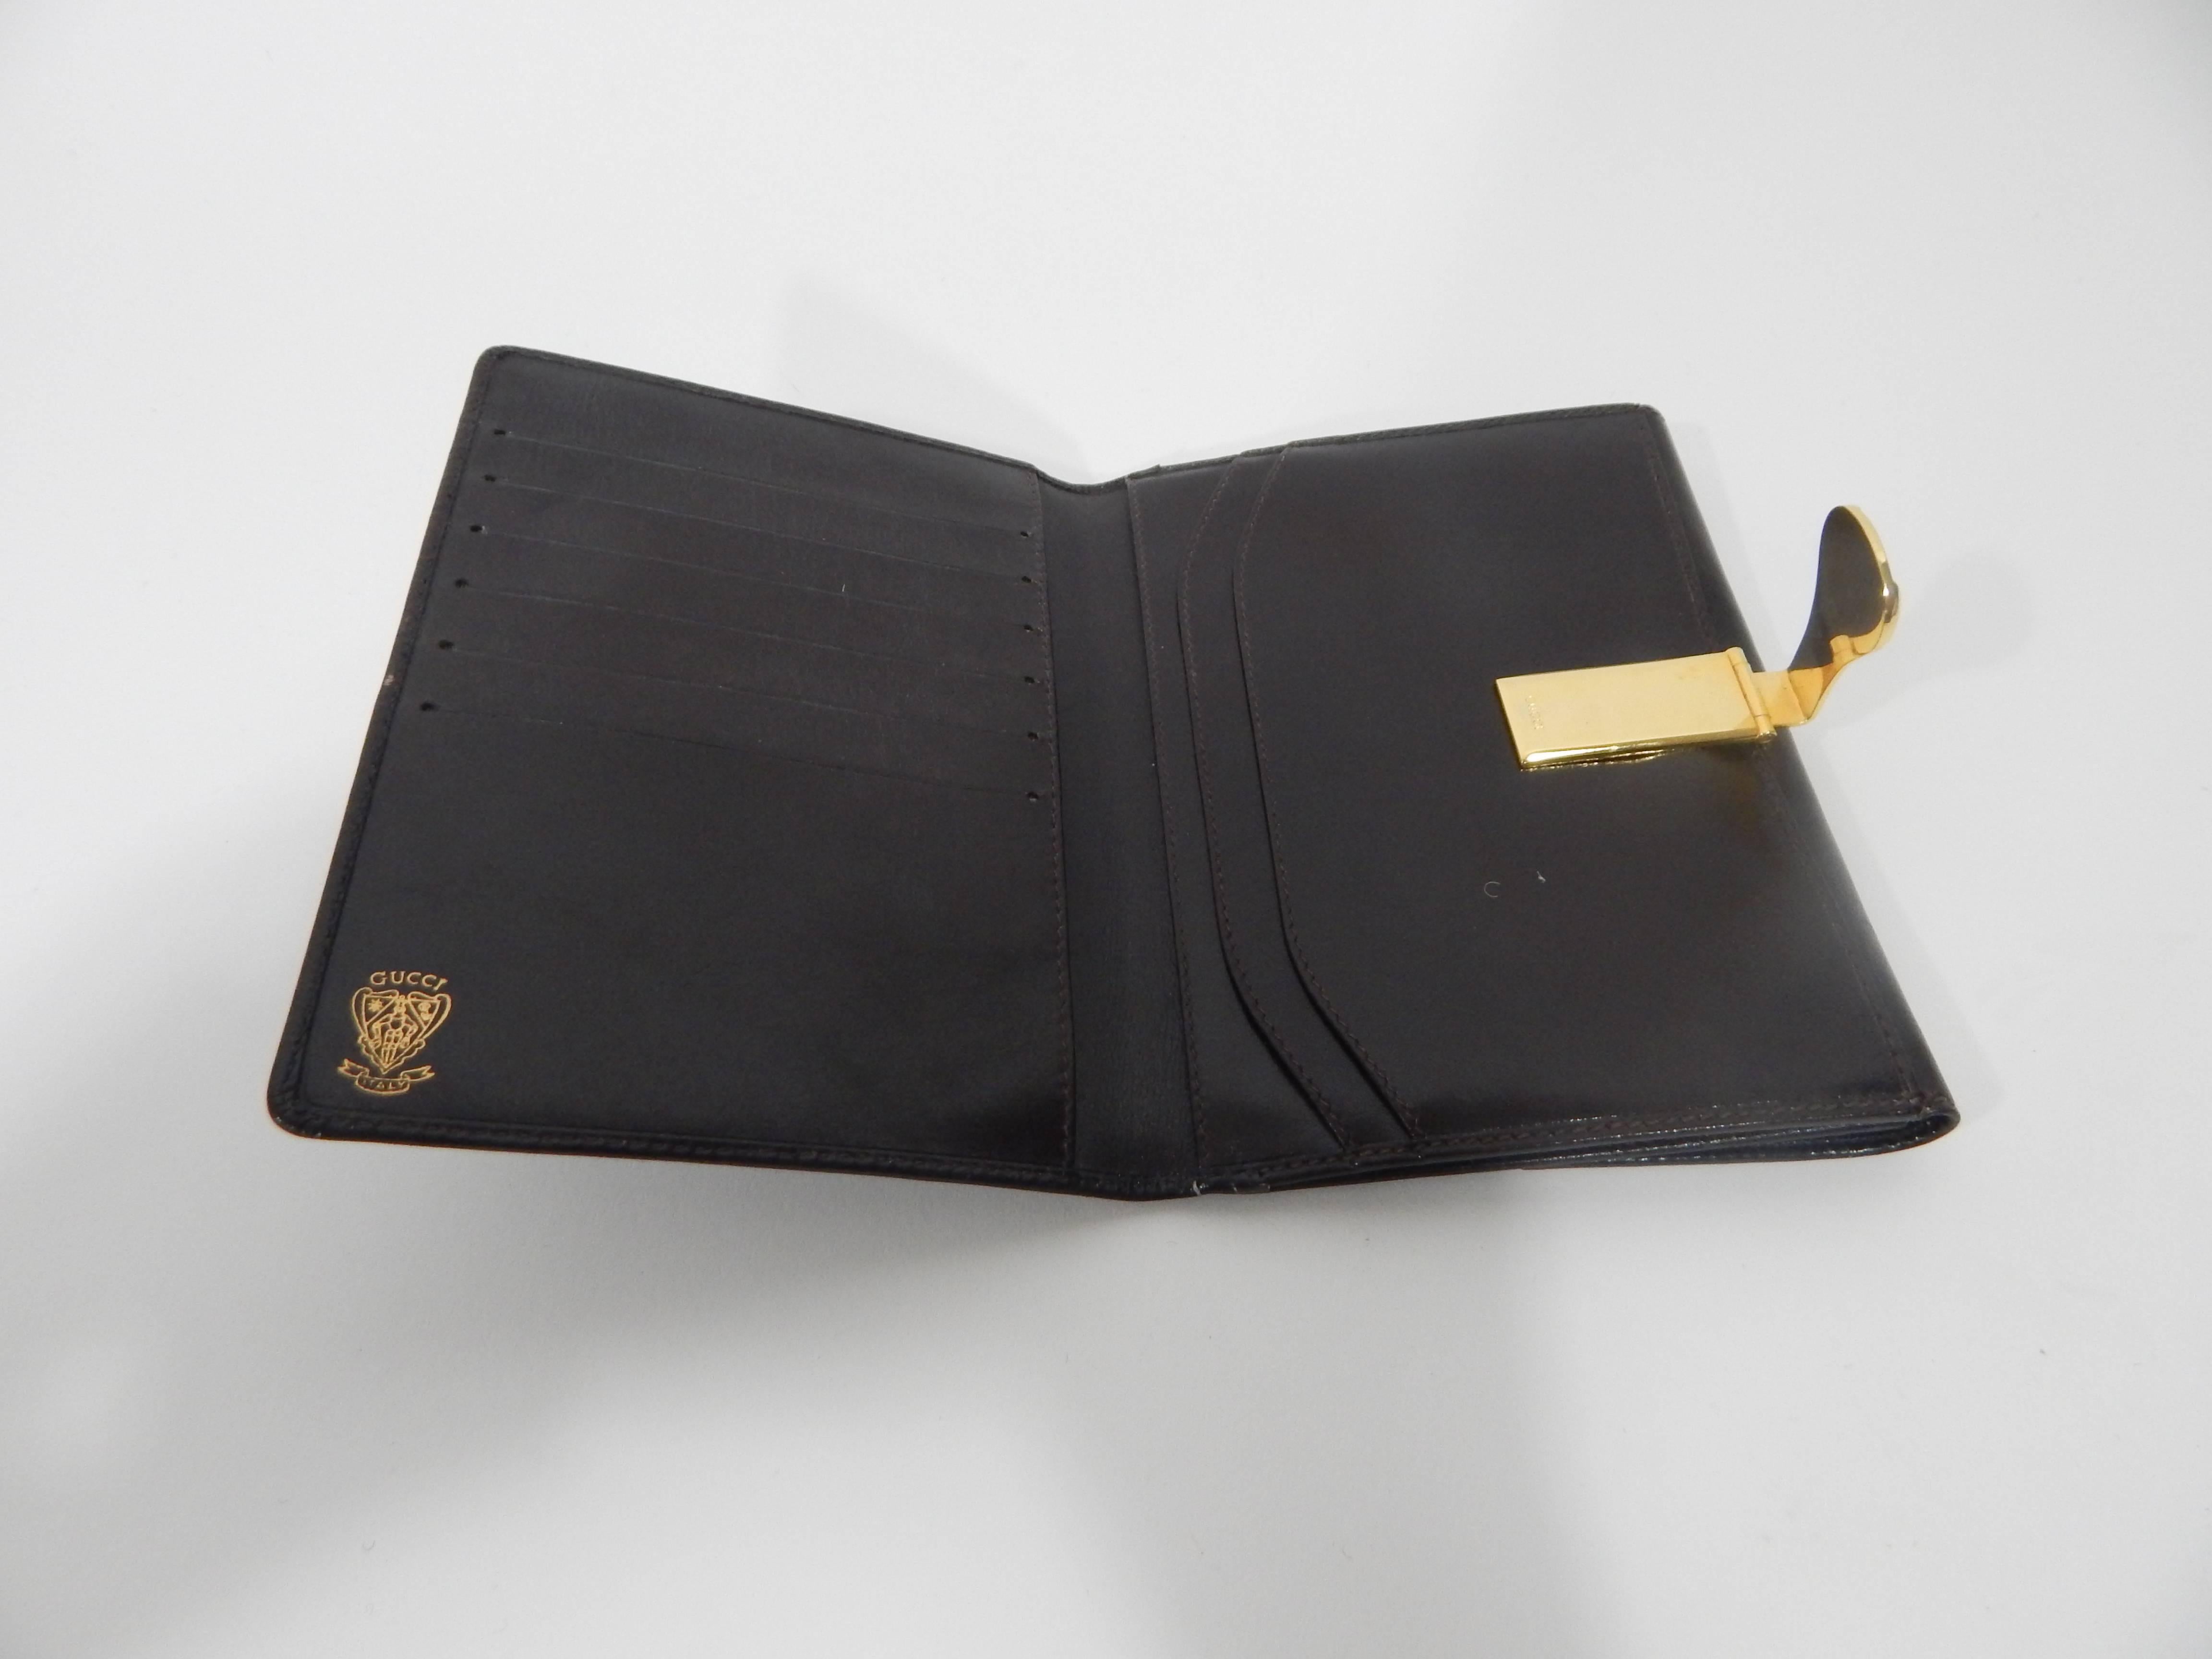 Chocolate Brown Leathr Gucci Wallet. Gold and Silver Clasp Closure with Gucci Markings. Circa late 1990s. Made in Italy. Excellent Condition with exception of some light wear around clasp area. 